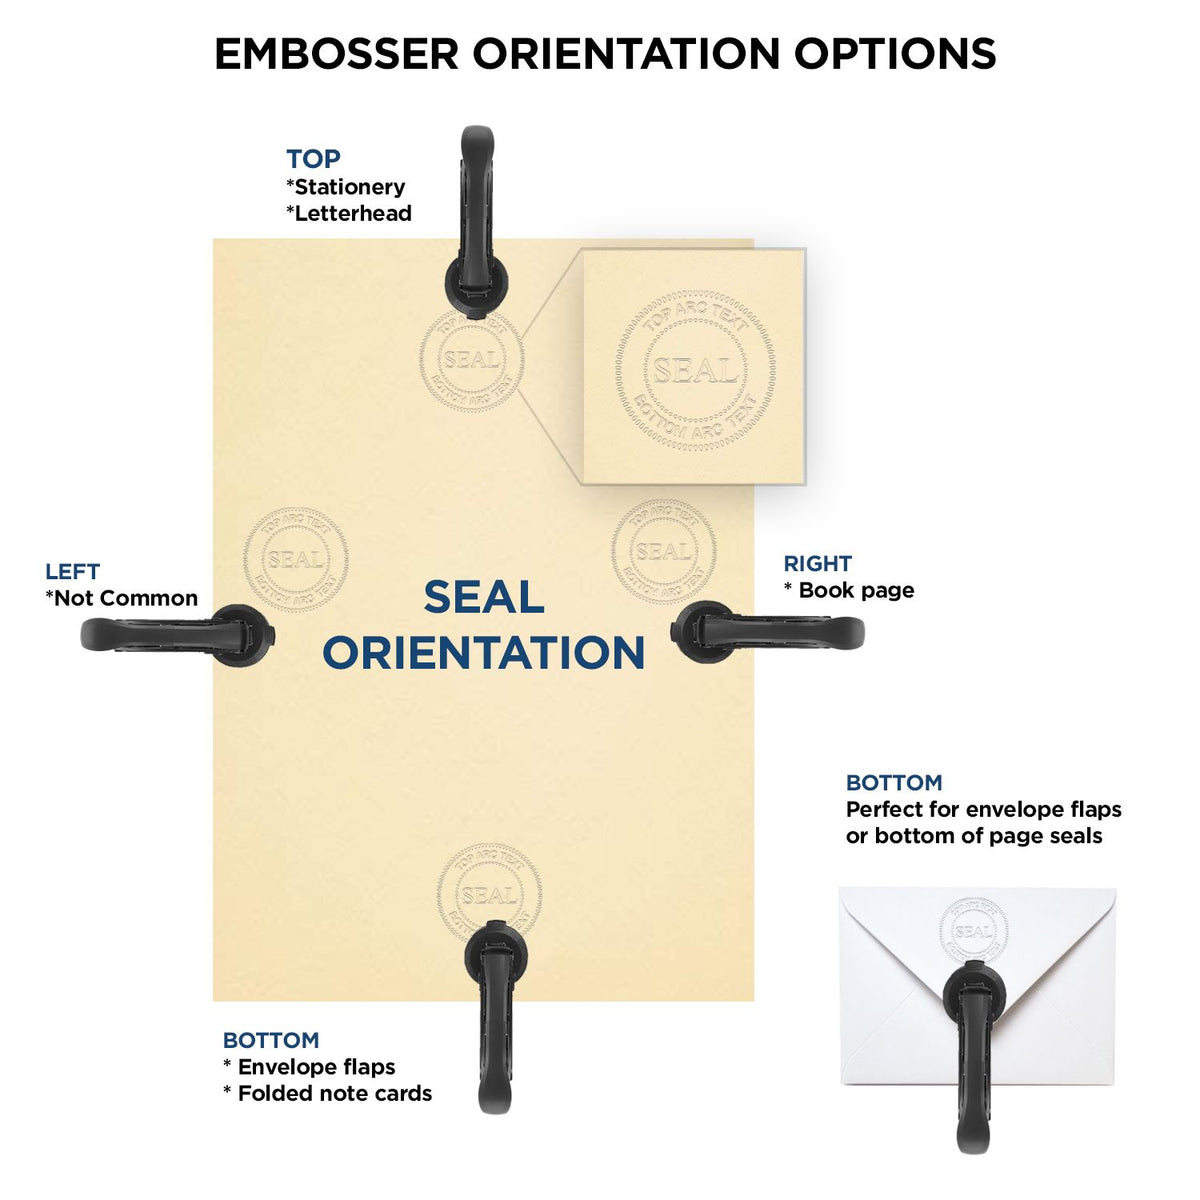 An infographic for the Handheld Kansas Professional Engineer Embosser showing embosser orientation, this is showing examples of a top, bottom, right and left insert.